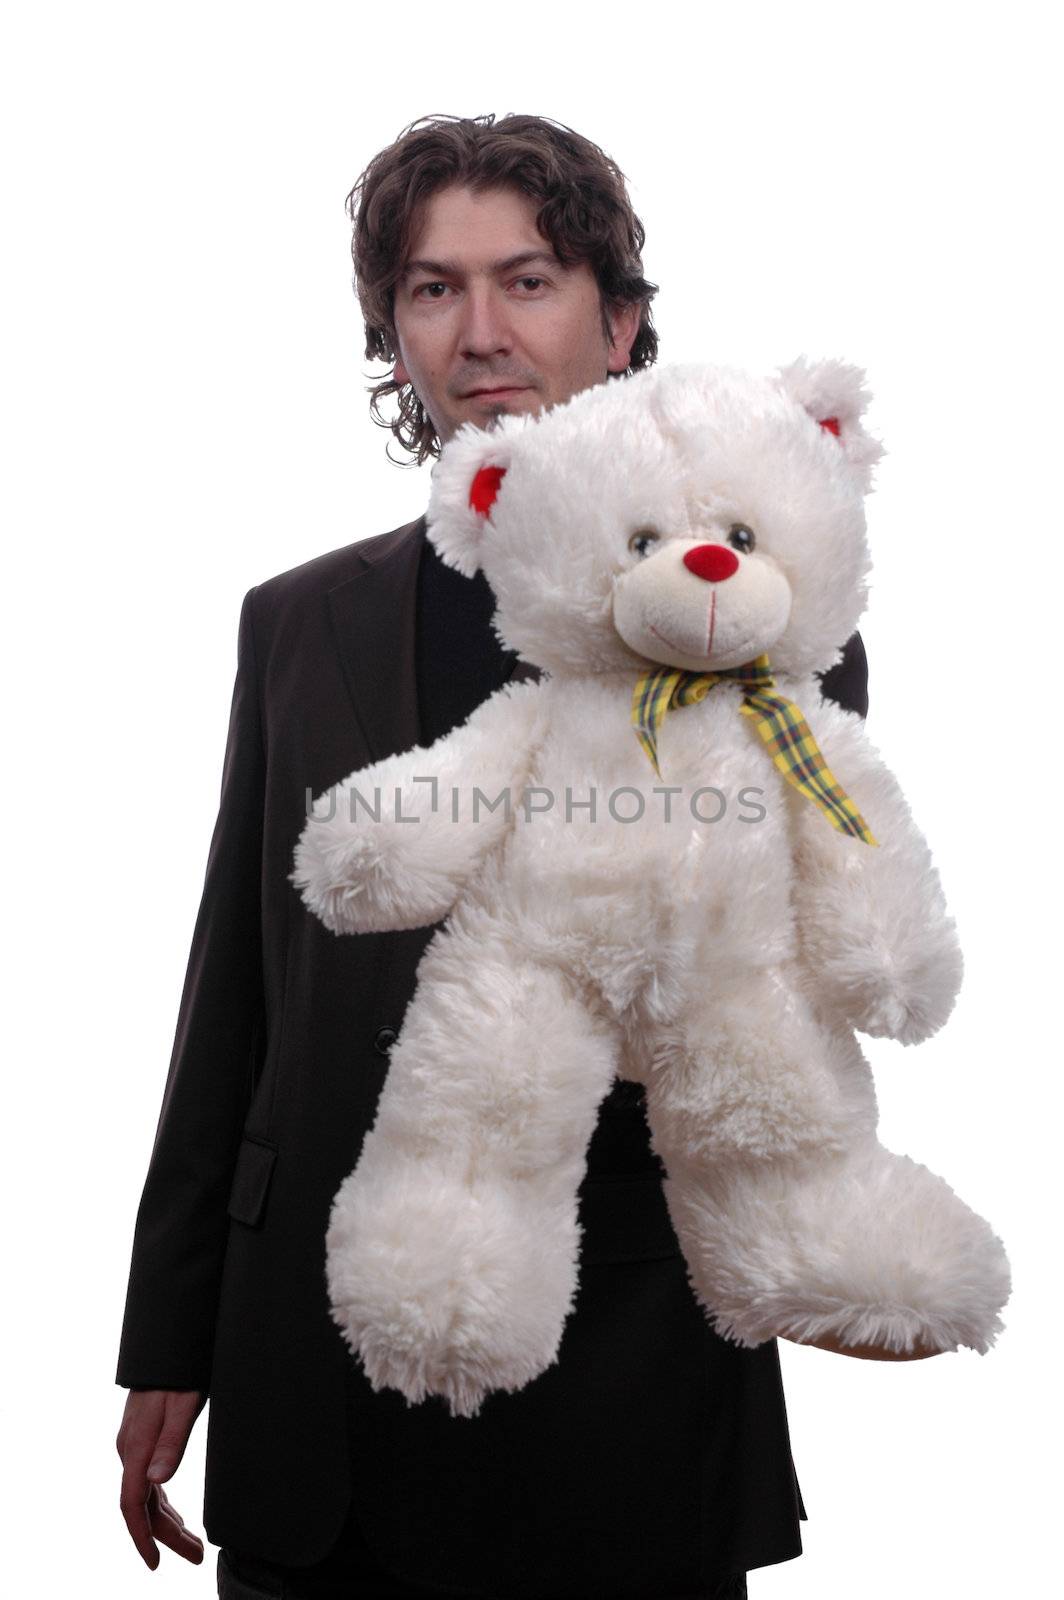 Handsome young man with teddy bear and red heart by raalves